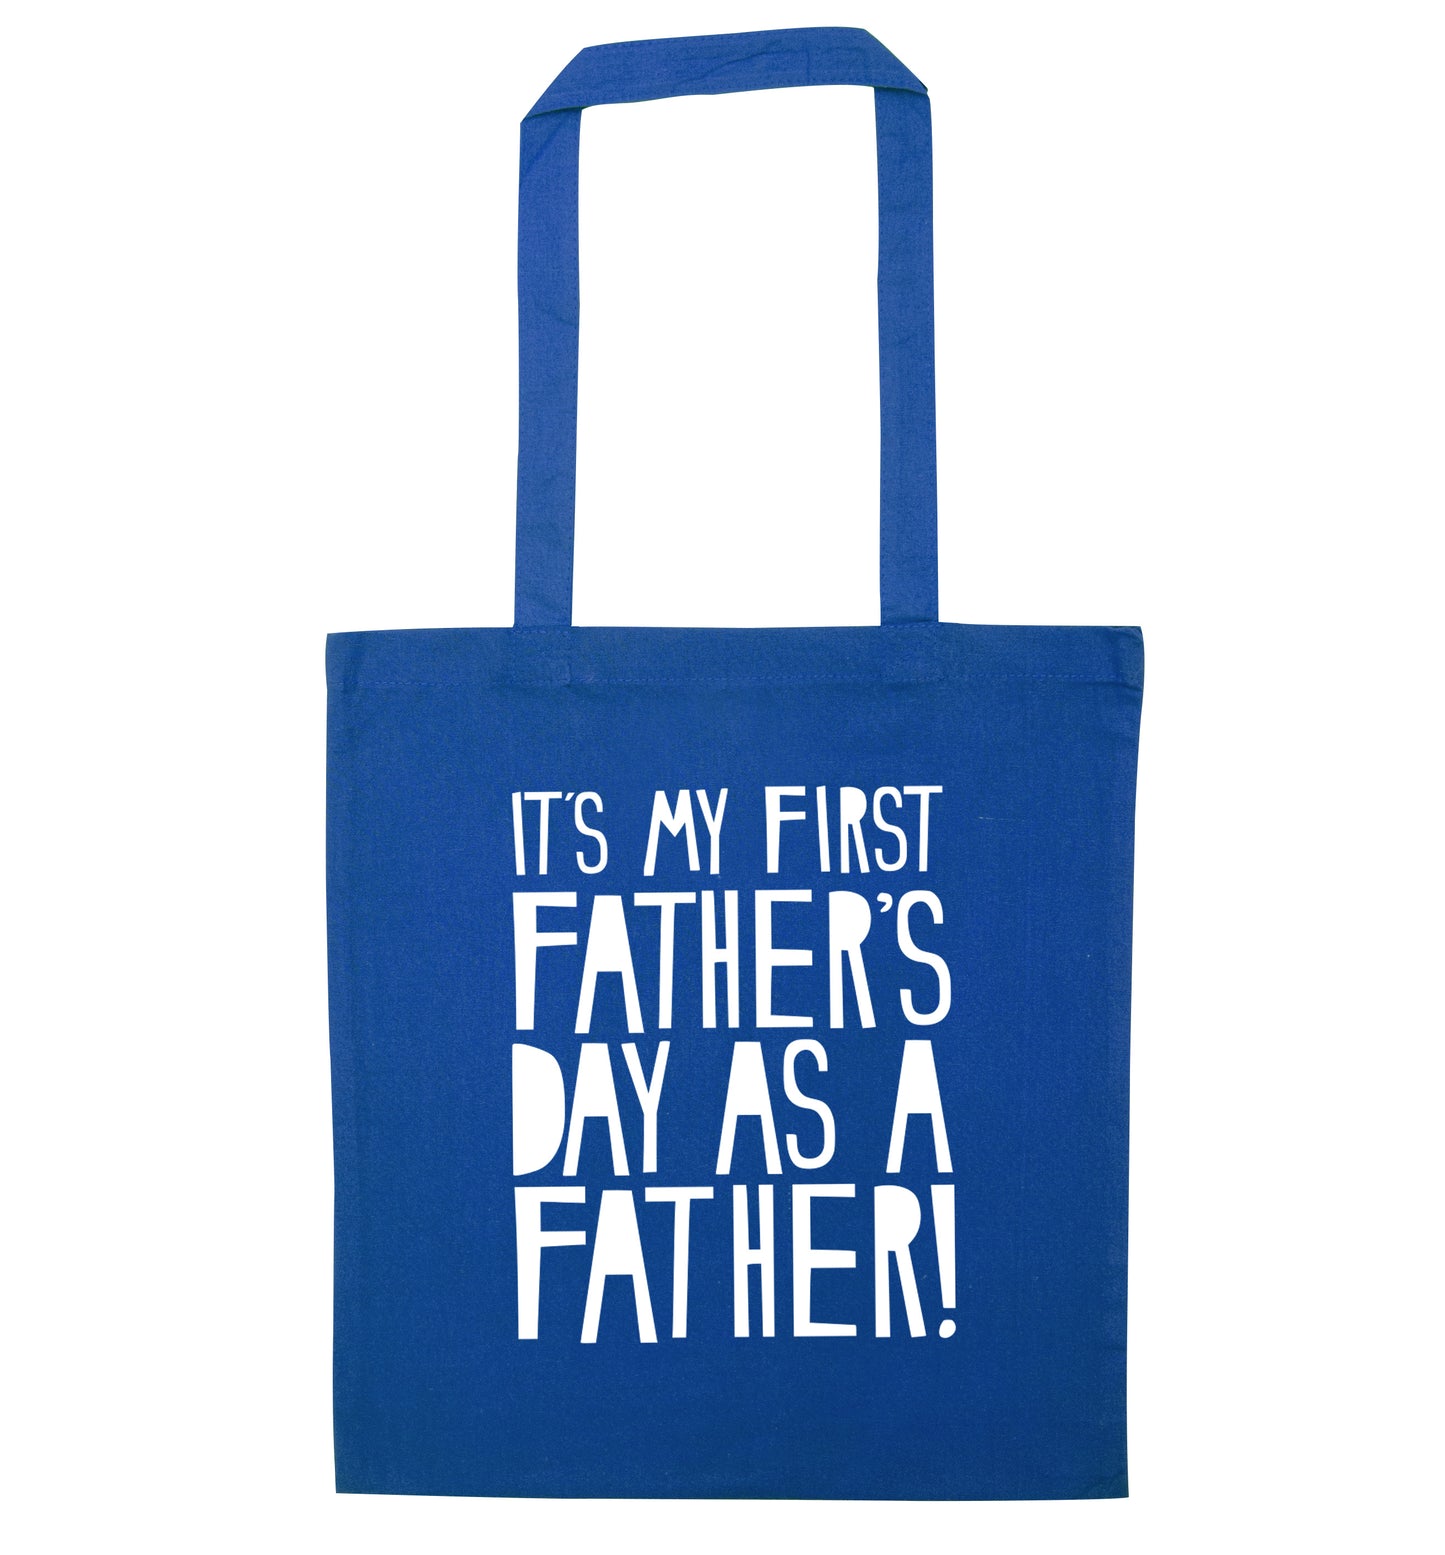 It's my first Father's Day as a father! blue tote bag